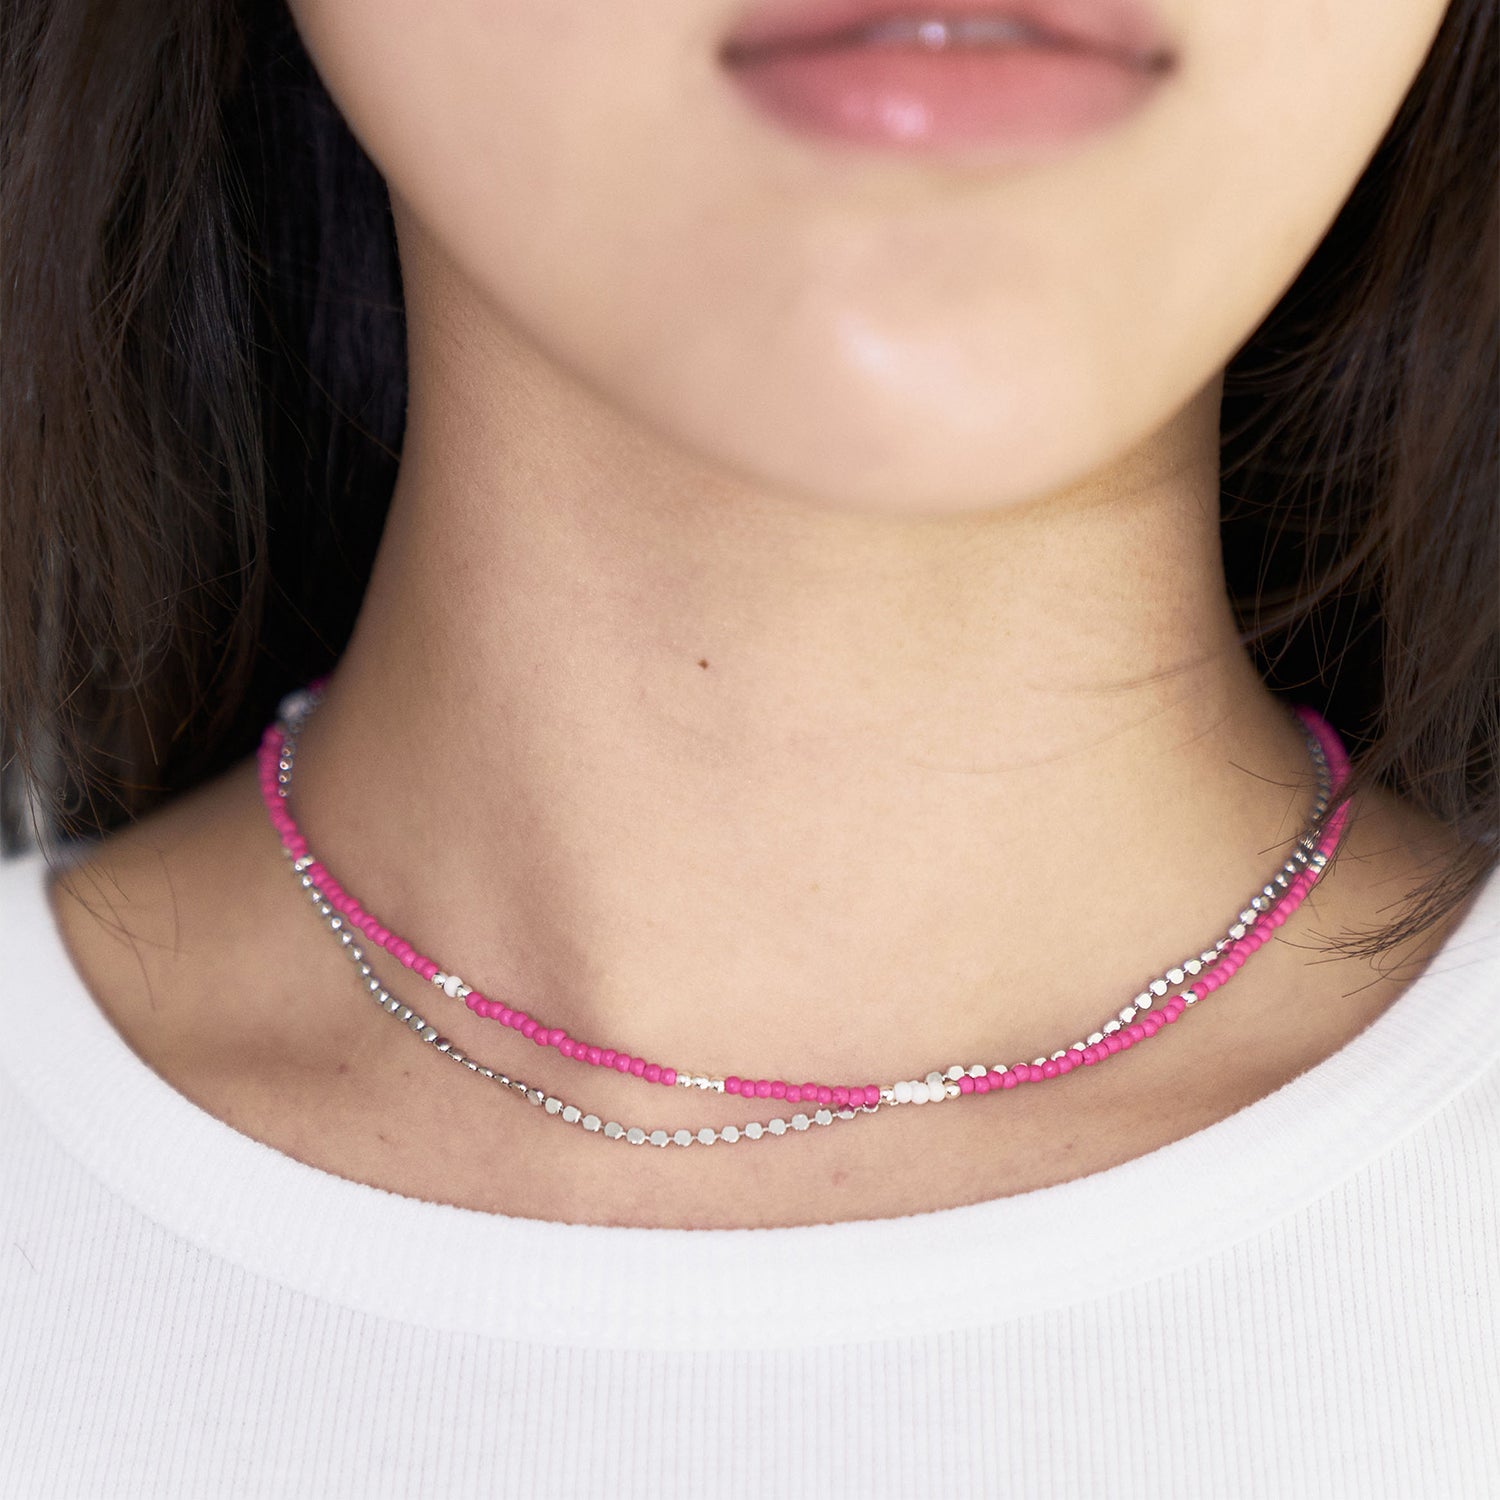 LOVE SKINNY BEADS NECKLACE PINK